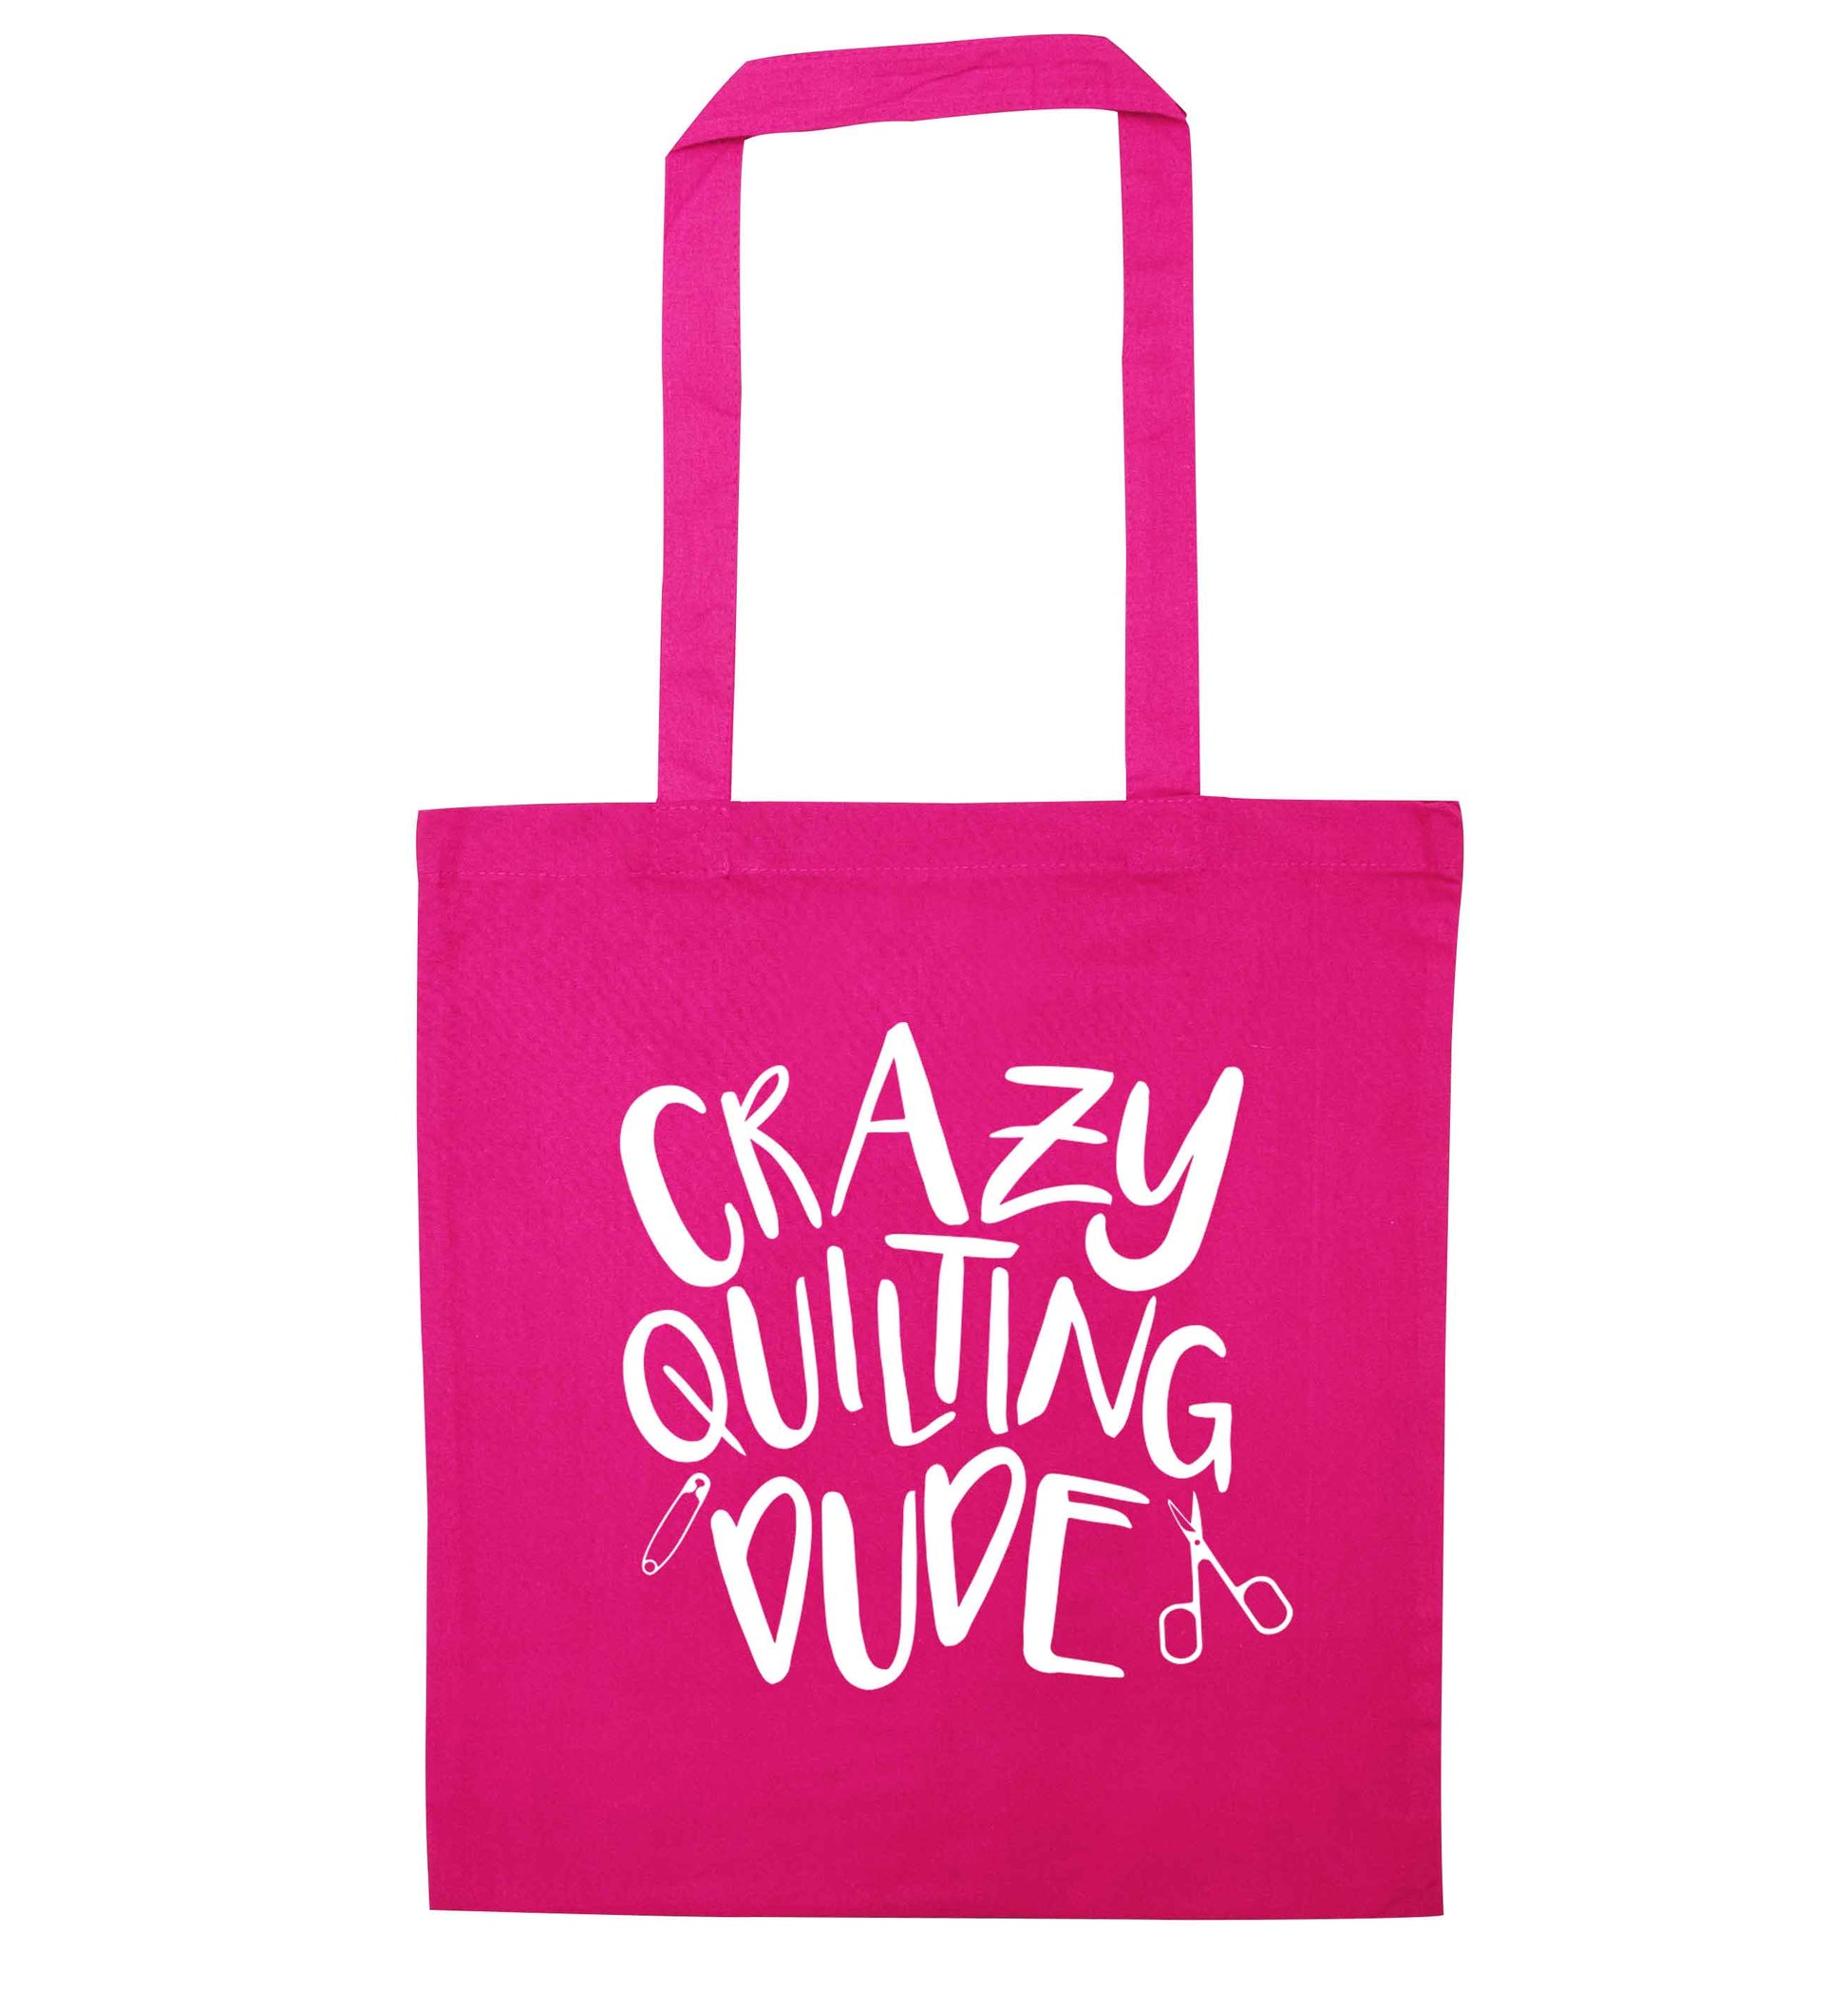 Crazy quilting dude pink tote bag